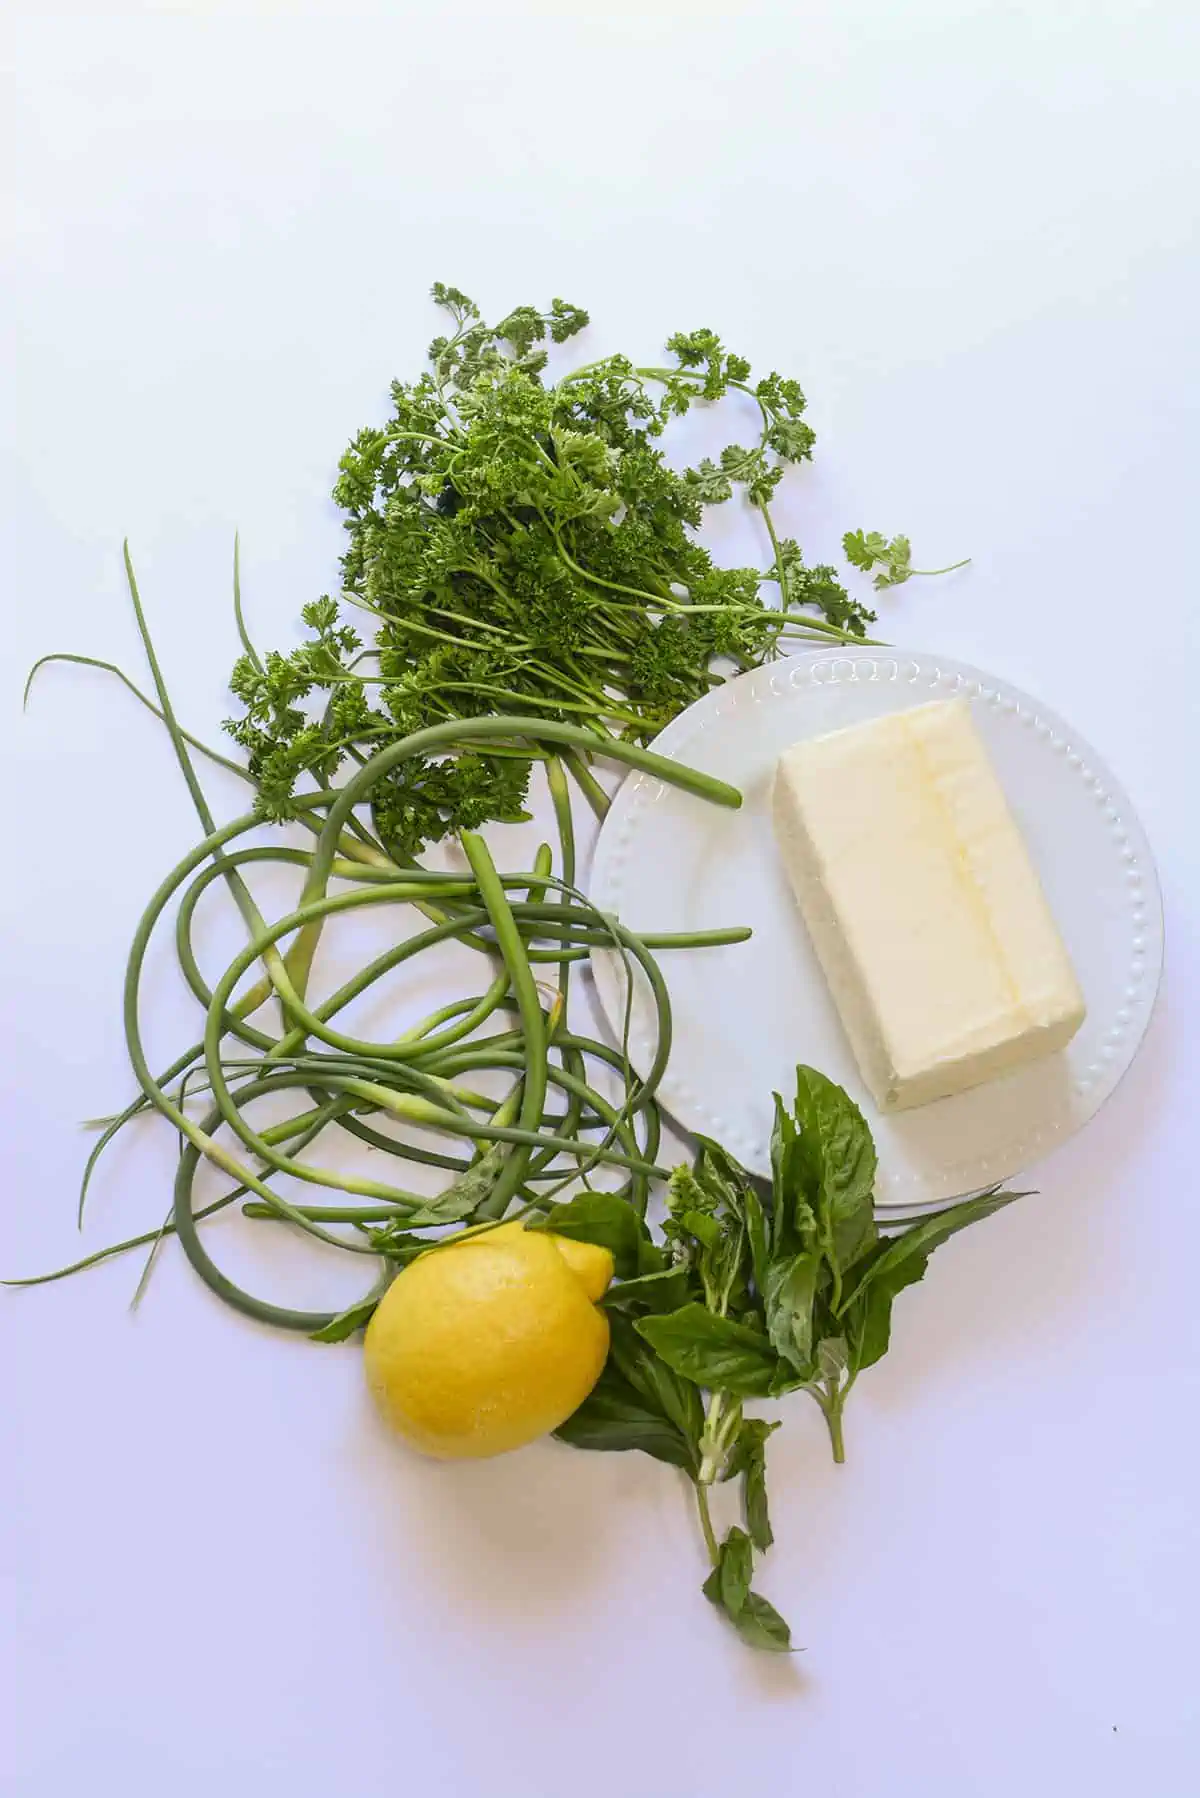 The ingredients needed to make garlic scape butter. Garlic scapes, butter, lemon, parsley and basil.